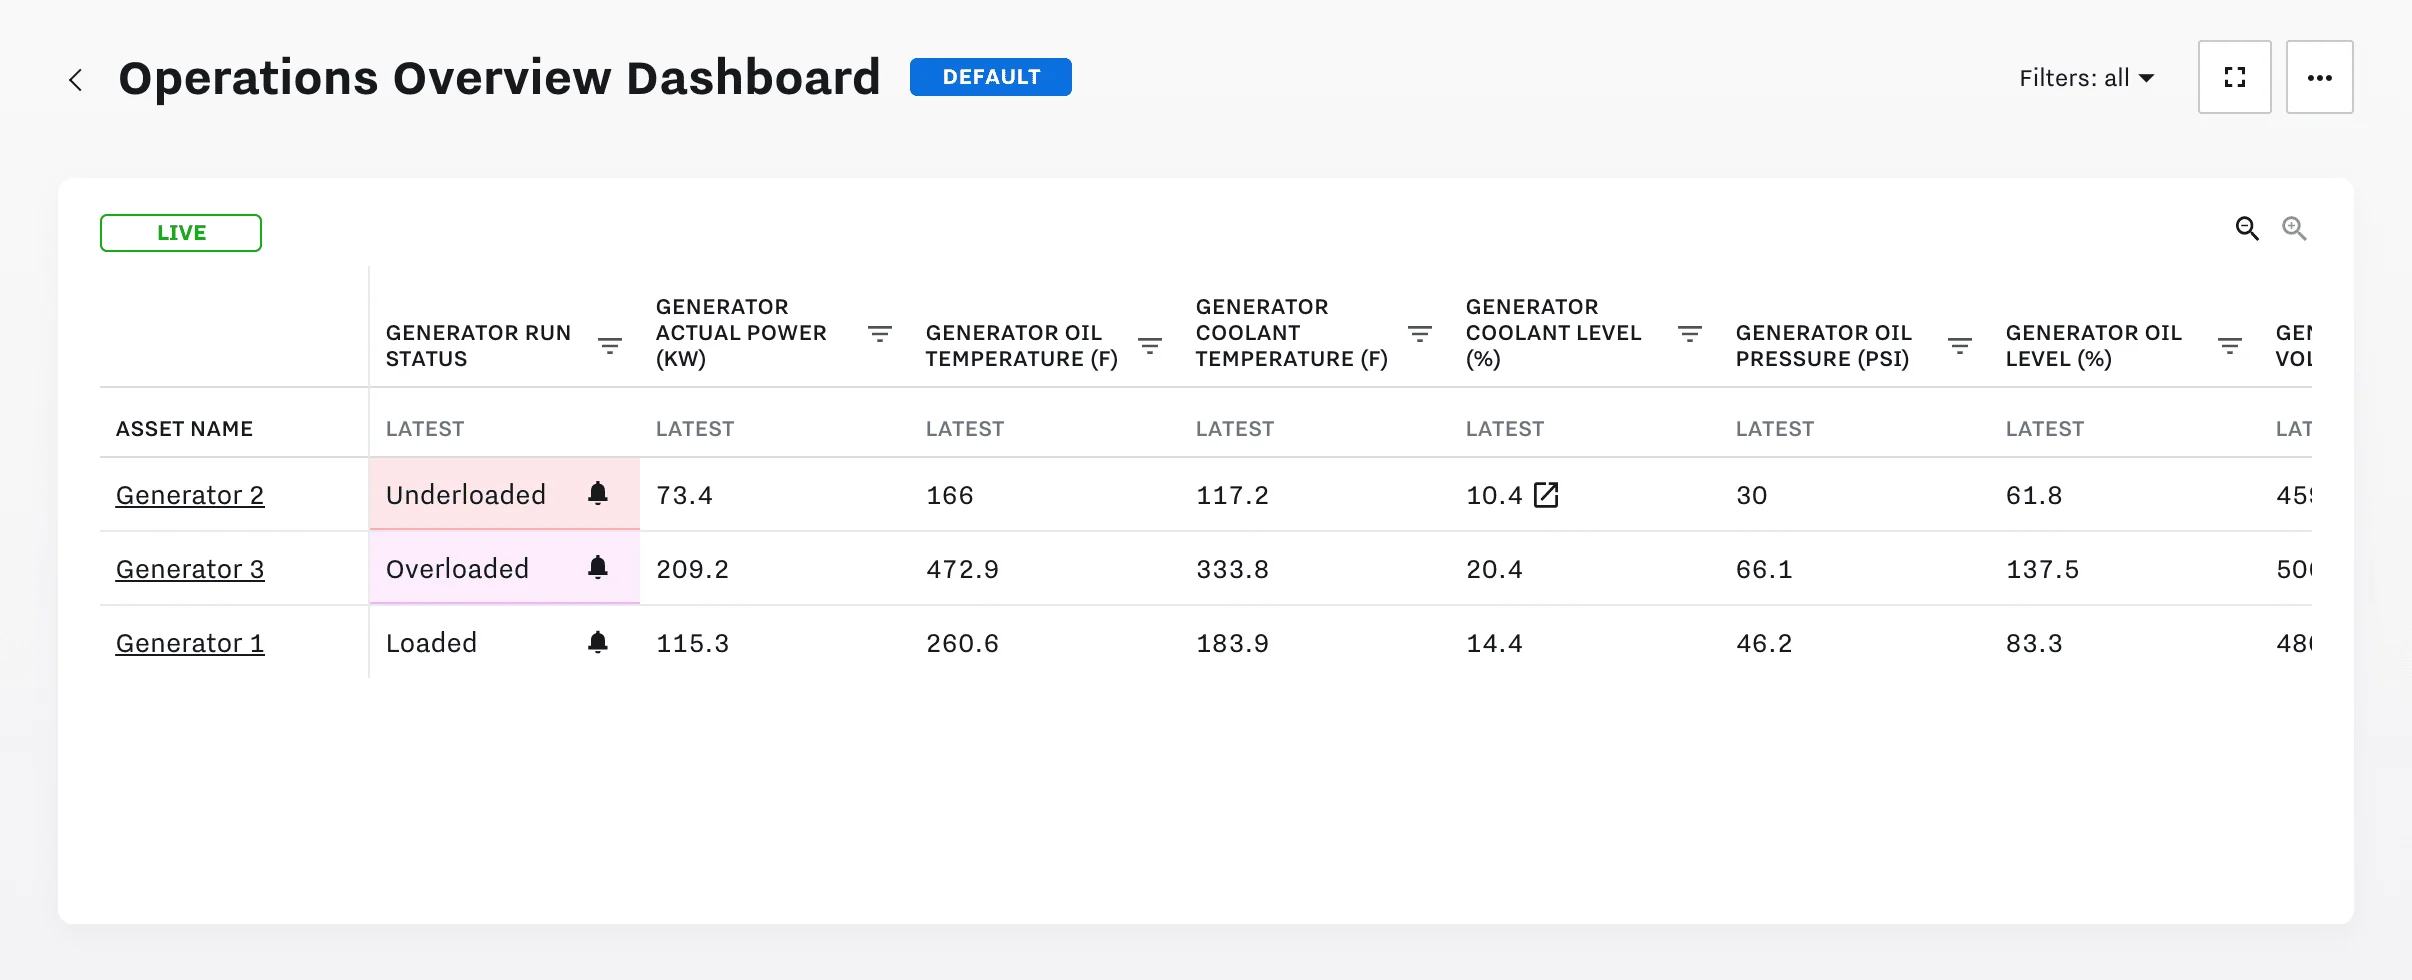 Operations Overview Dashboard